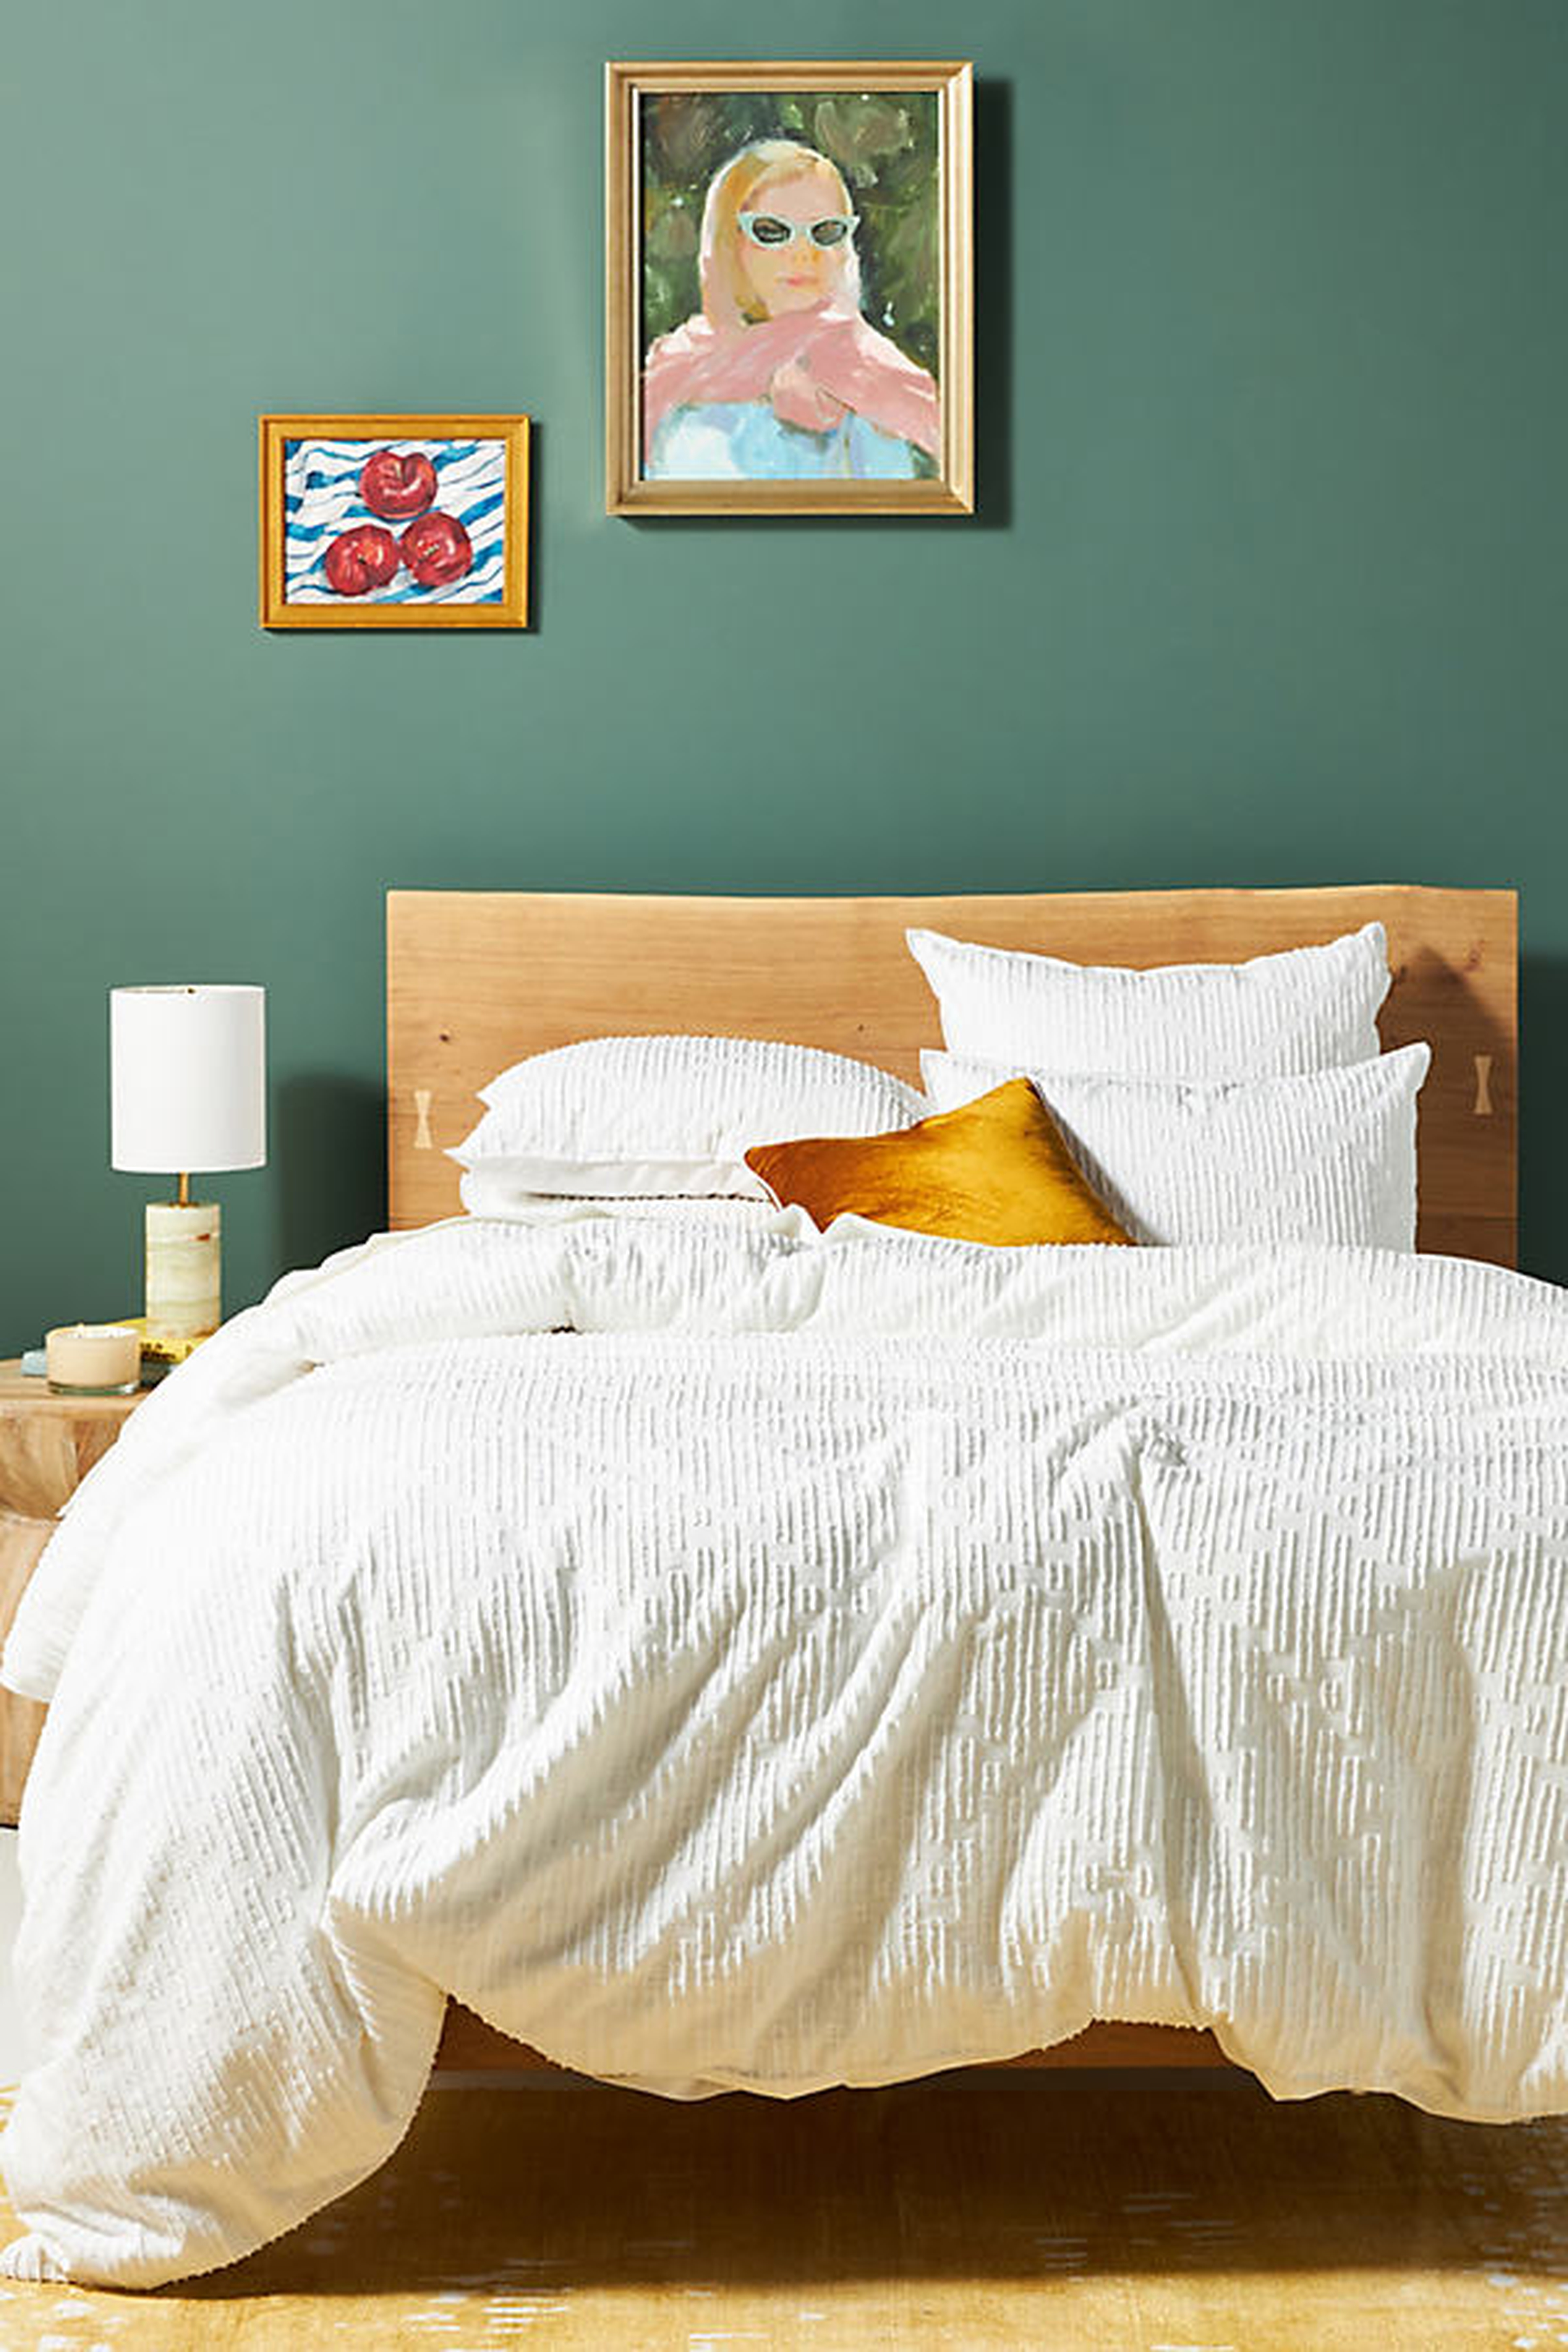 Queen Clipped Jacquard Duvet Cover By Anthropologie in White Size TW TOP/BED - Anthropologie